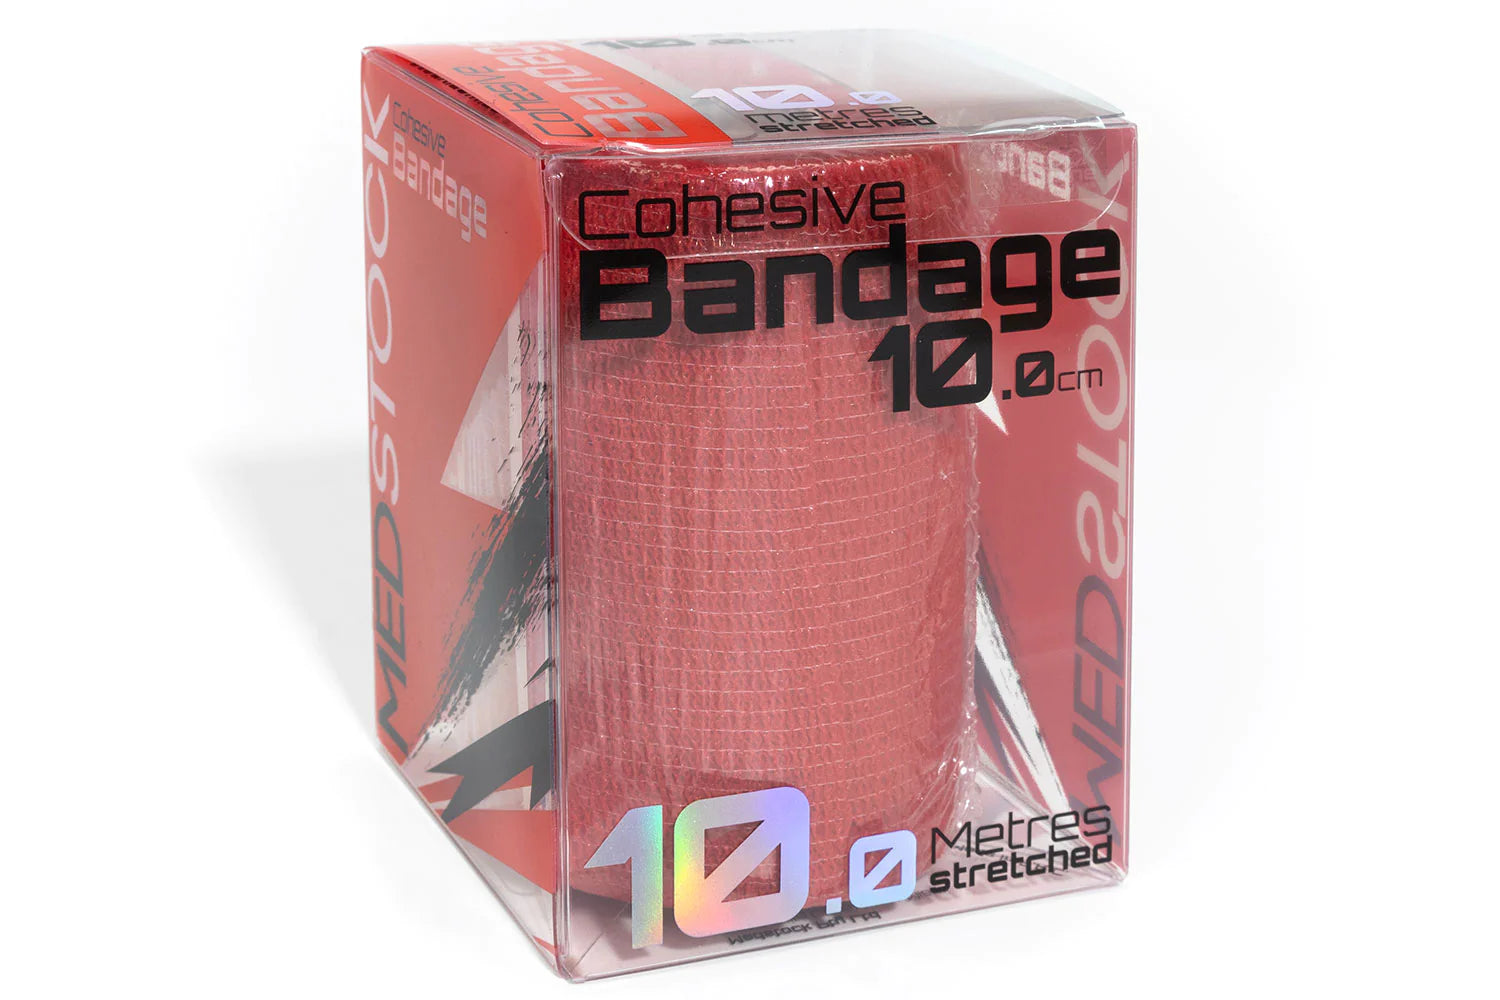 Medstock Cohesive Bandage Red (Retail) -Box of 6